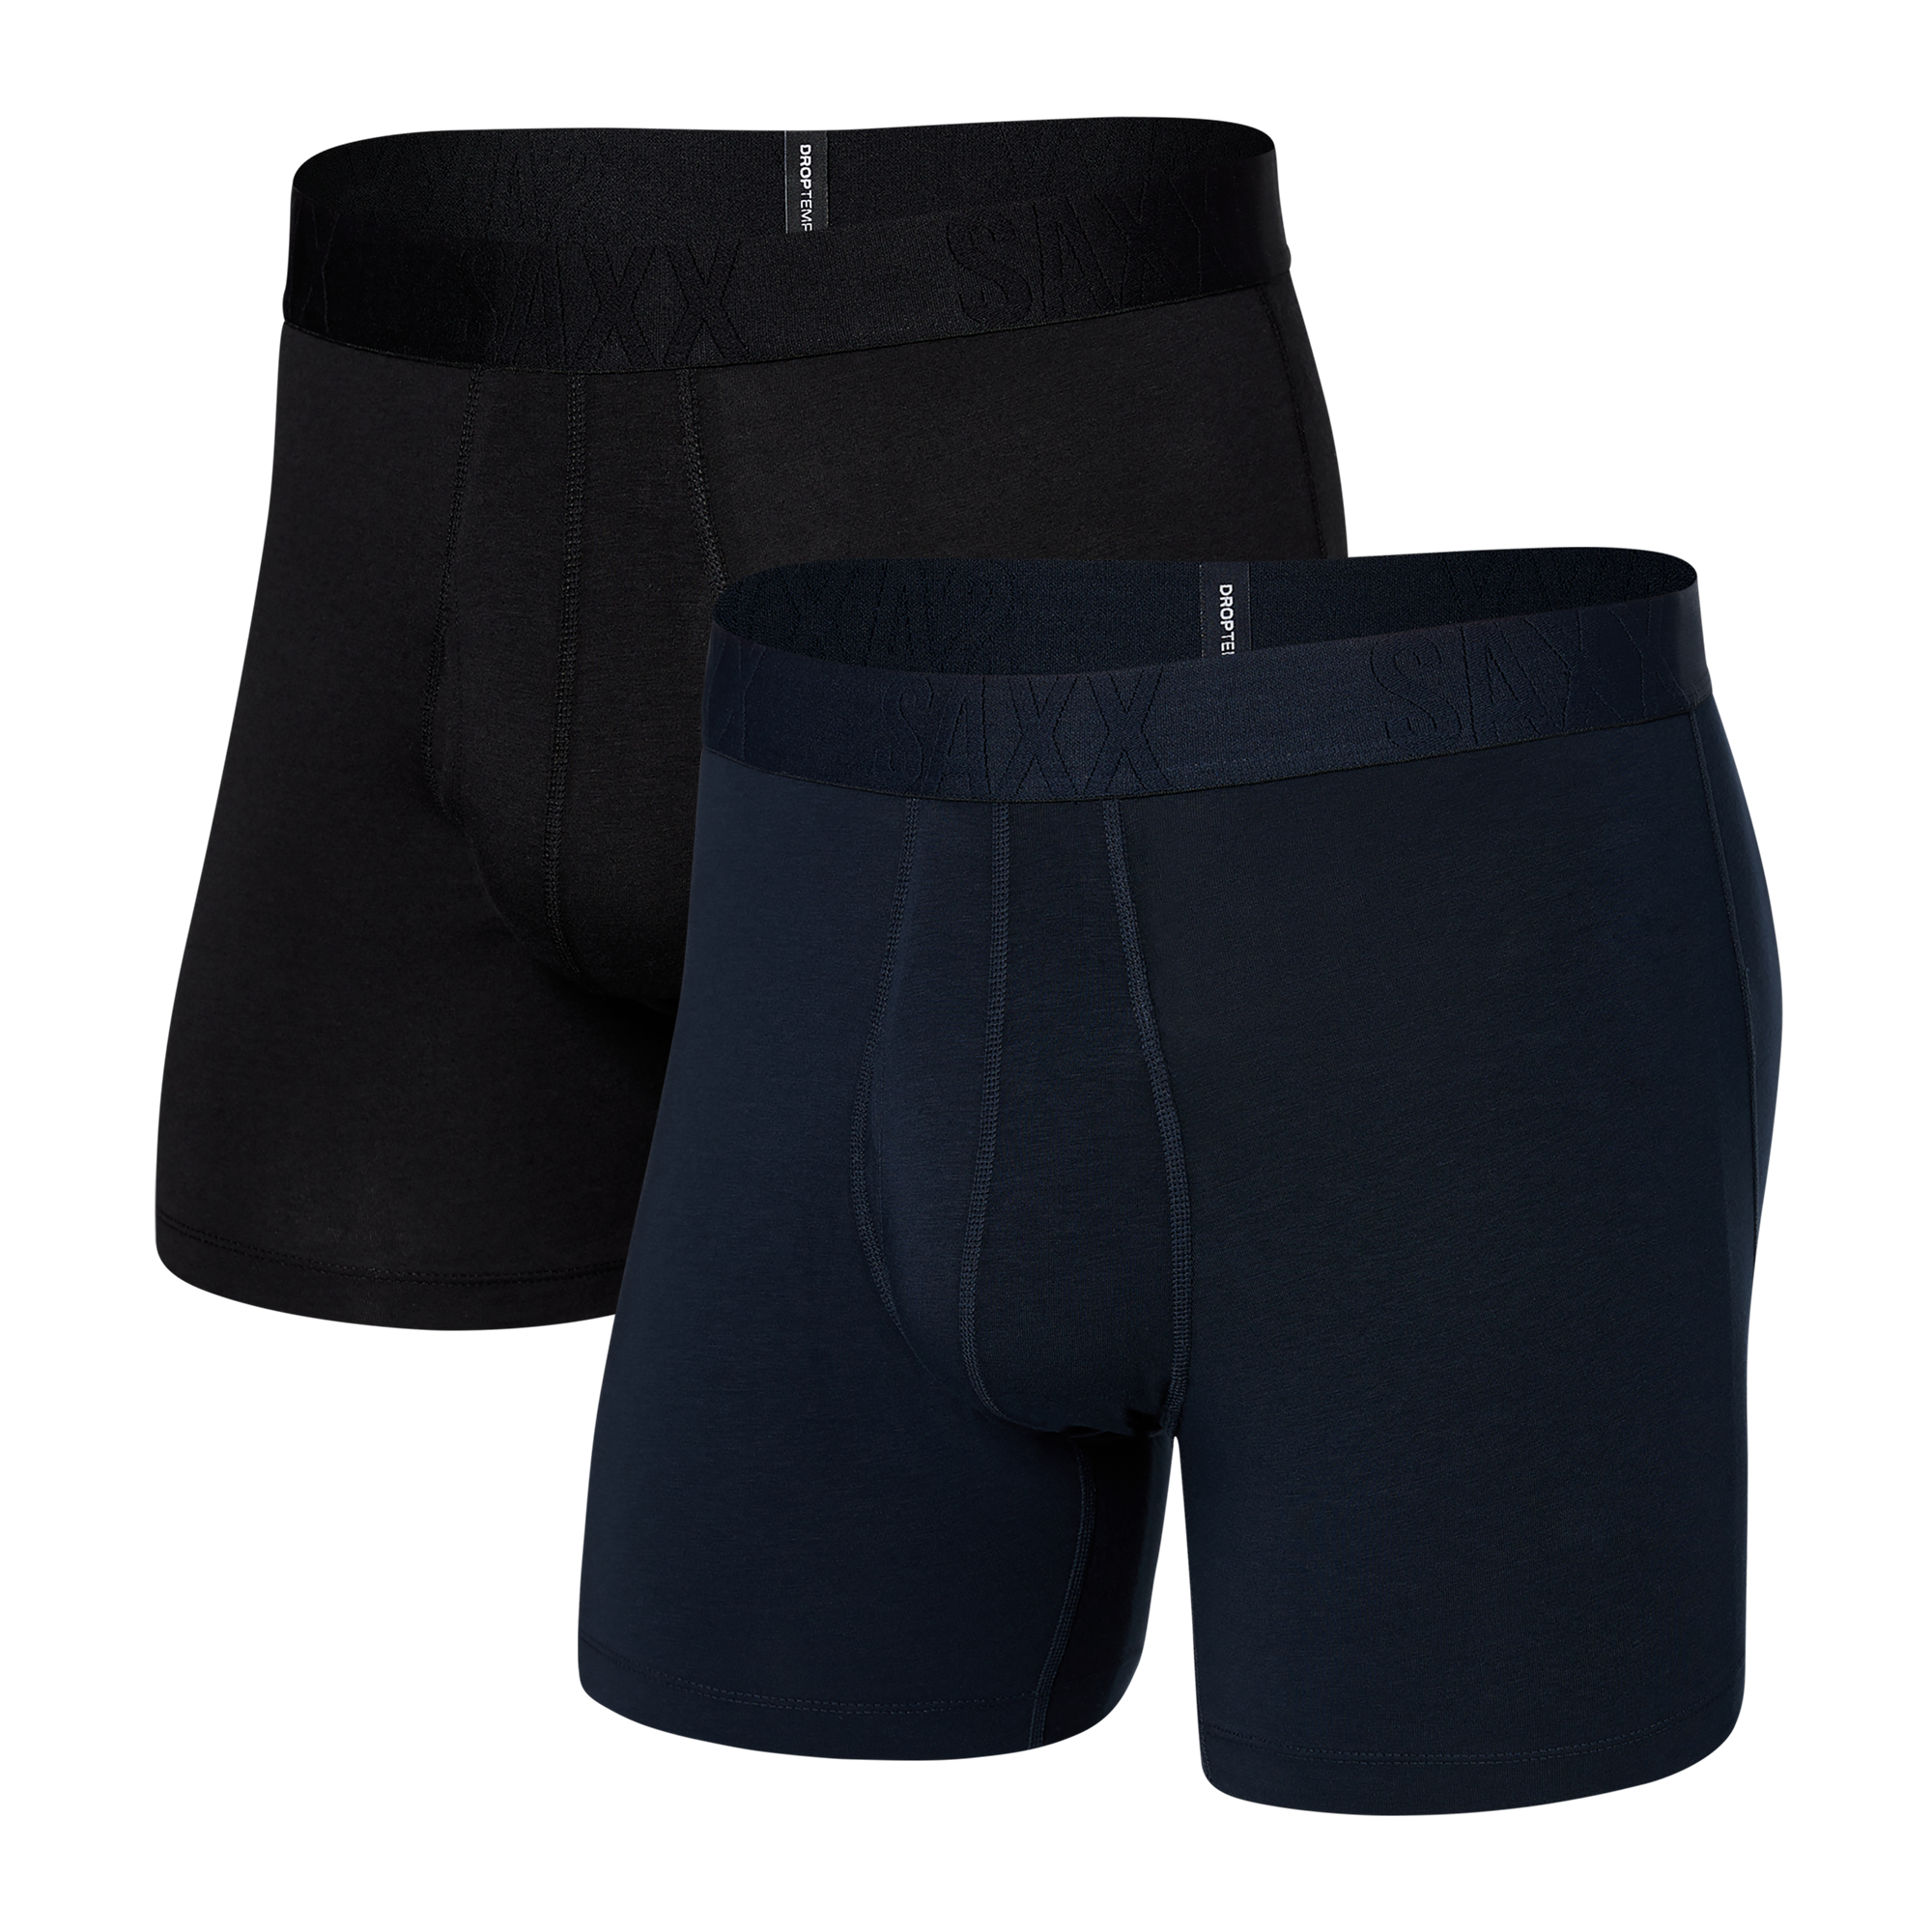 SAXX Ultra Tri-Blend Boxer Fly - Men's Underwear - 2 Pack - Free  Shipping